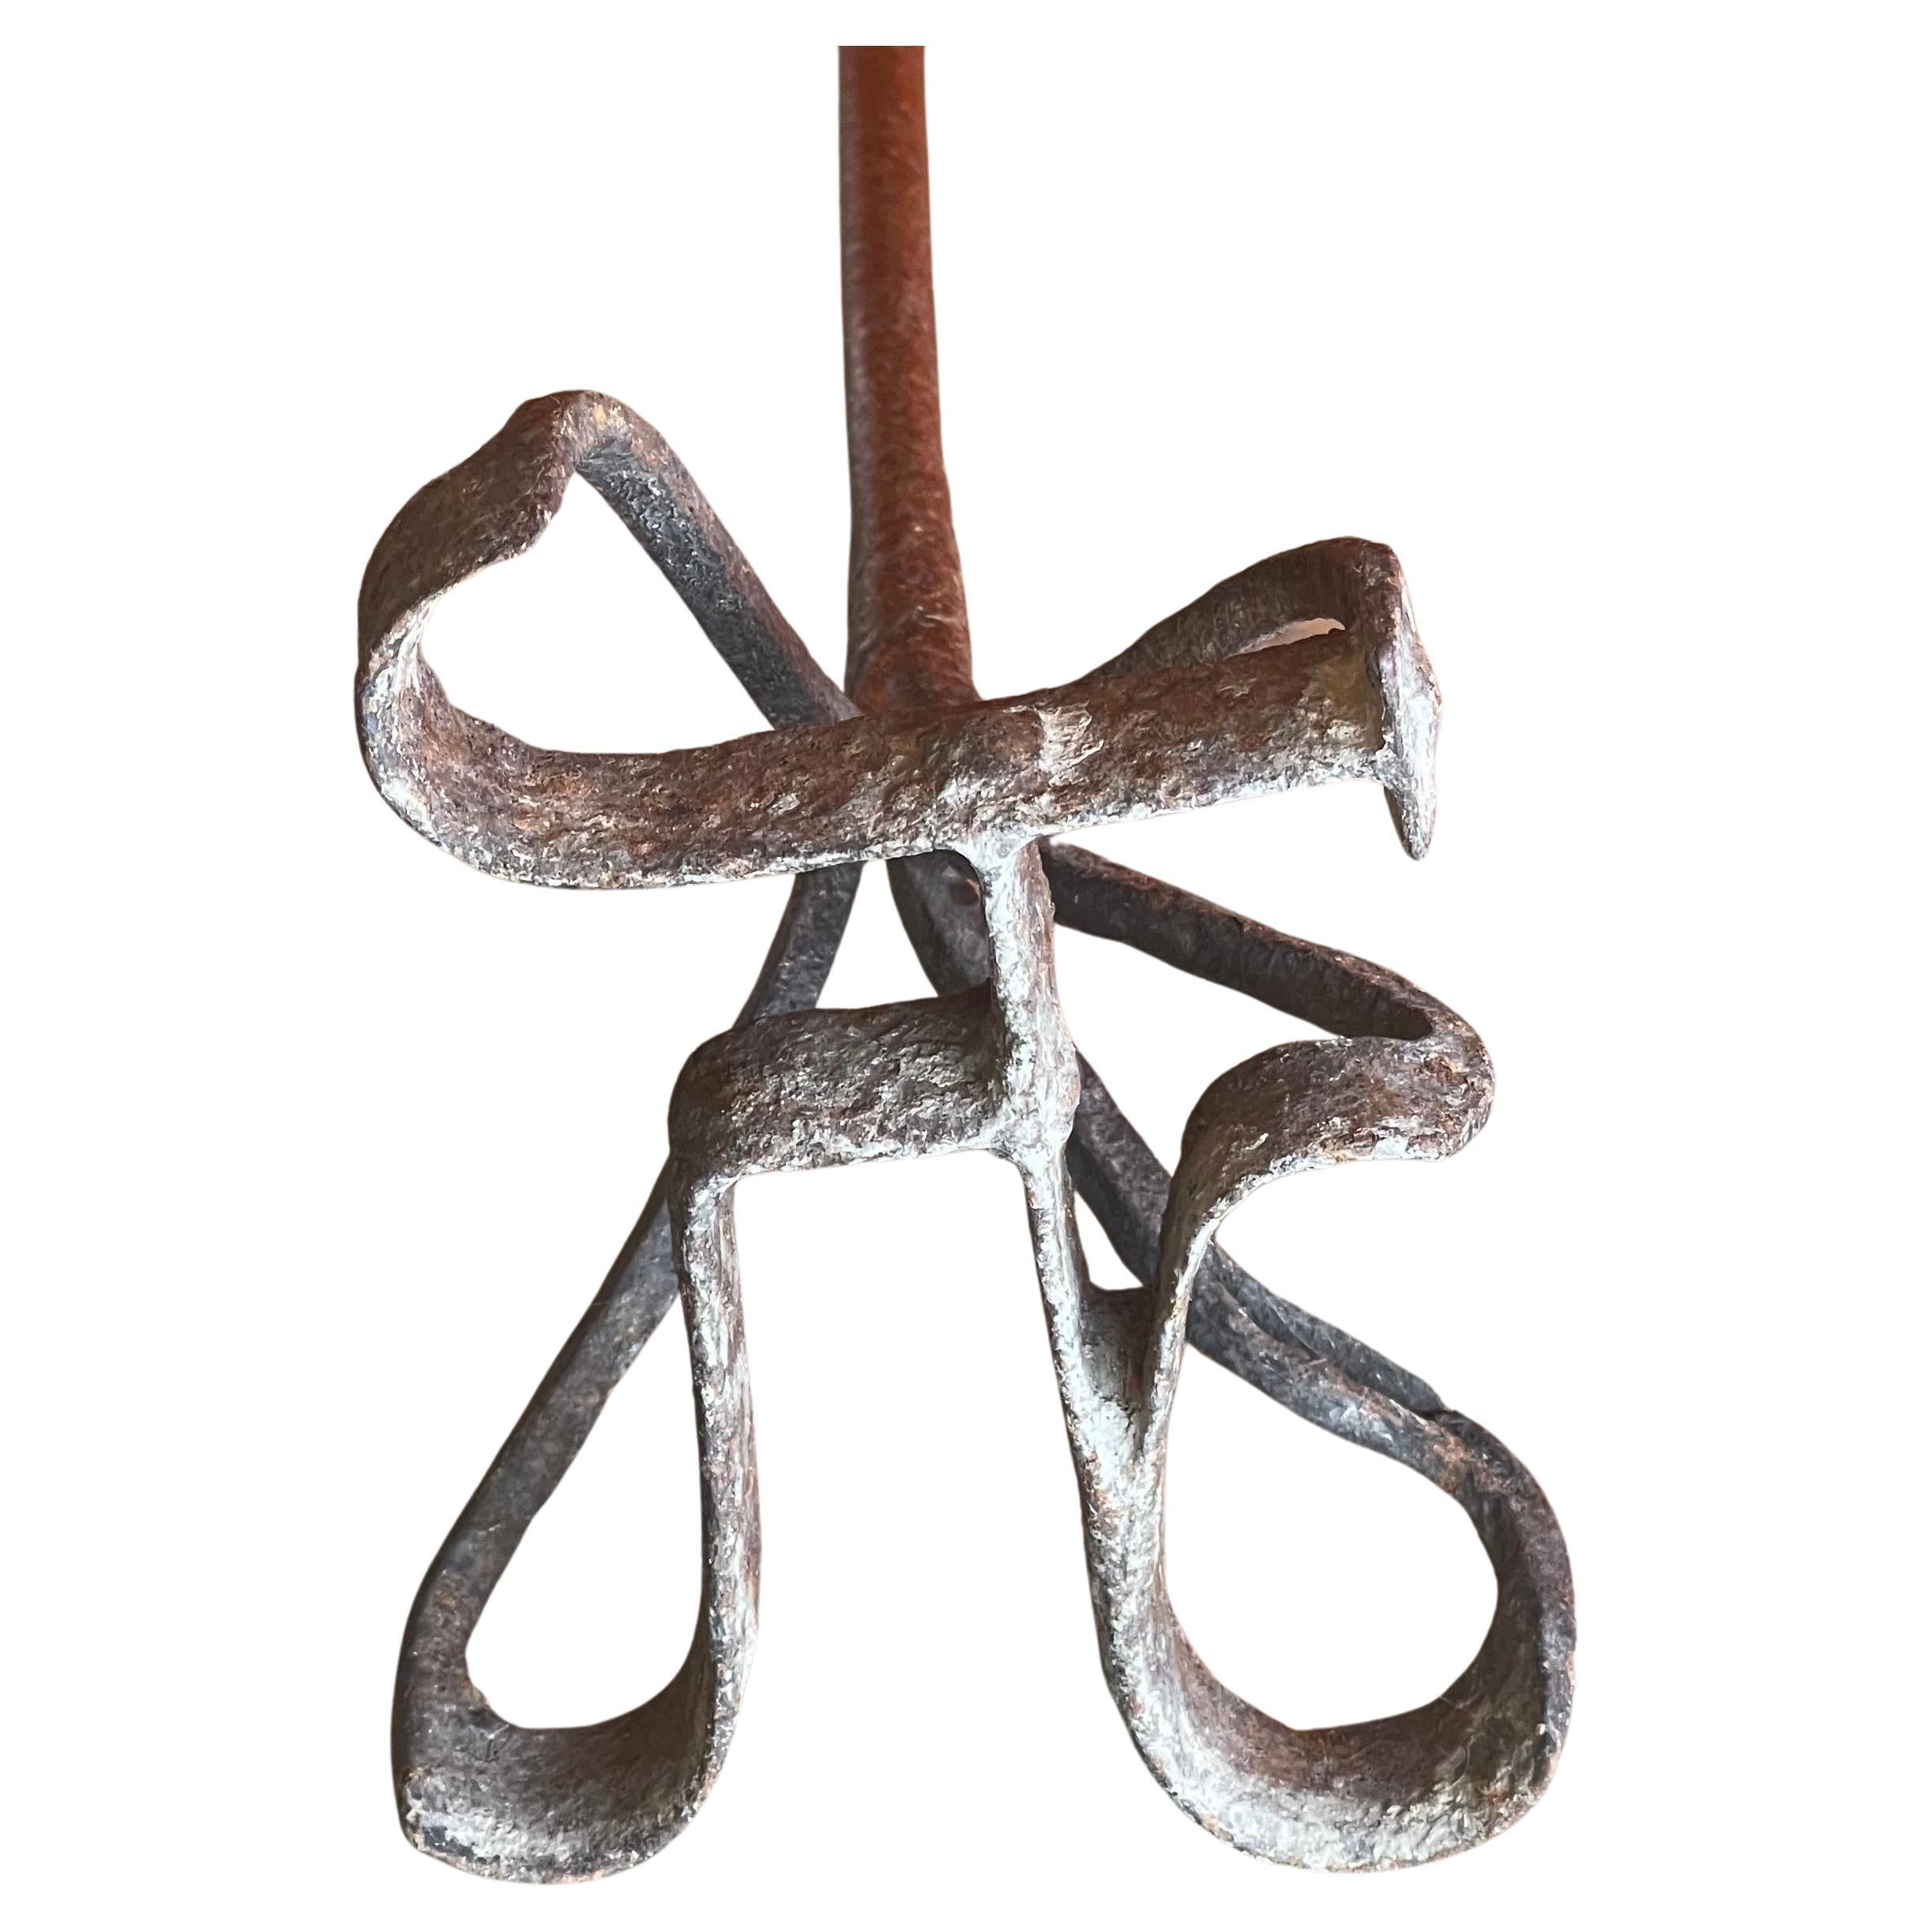 A very nice antique wrought iron western branding iron, circa 1940s. The piece is in good vintage condition (distressed) and measures 6